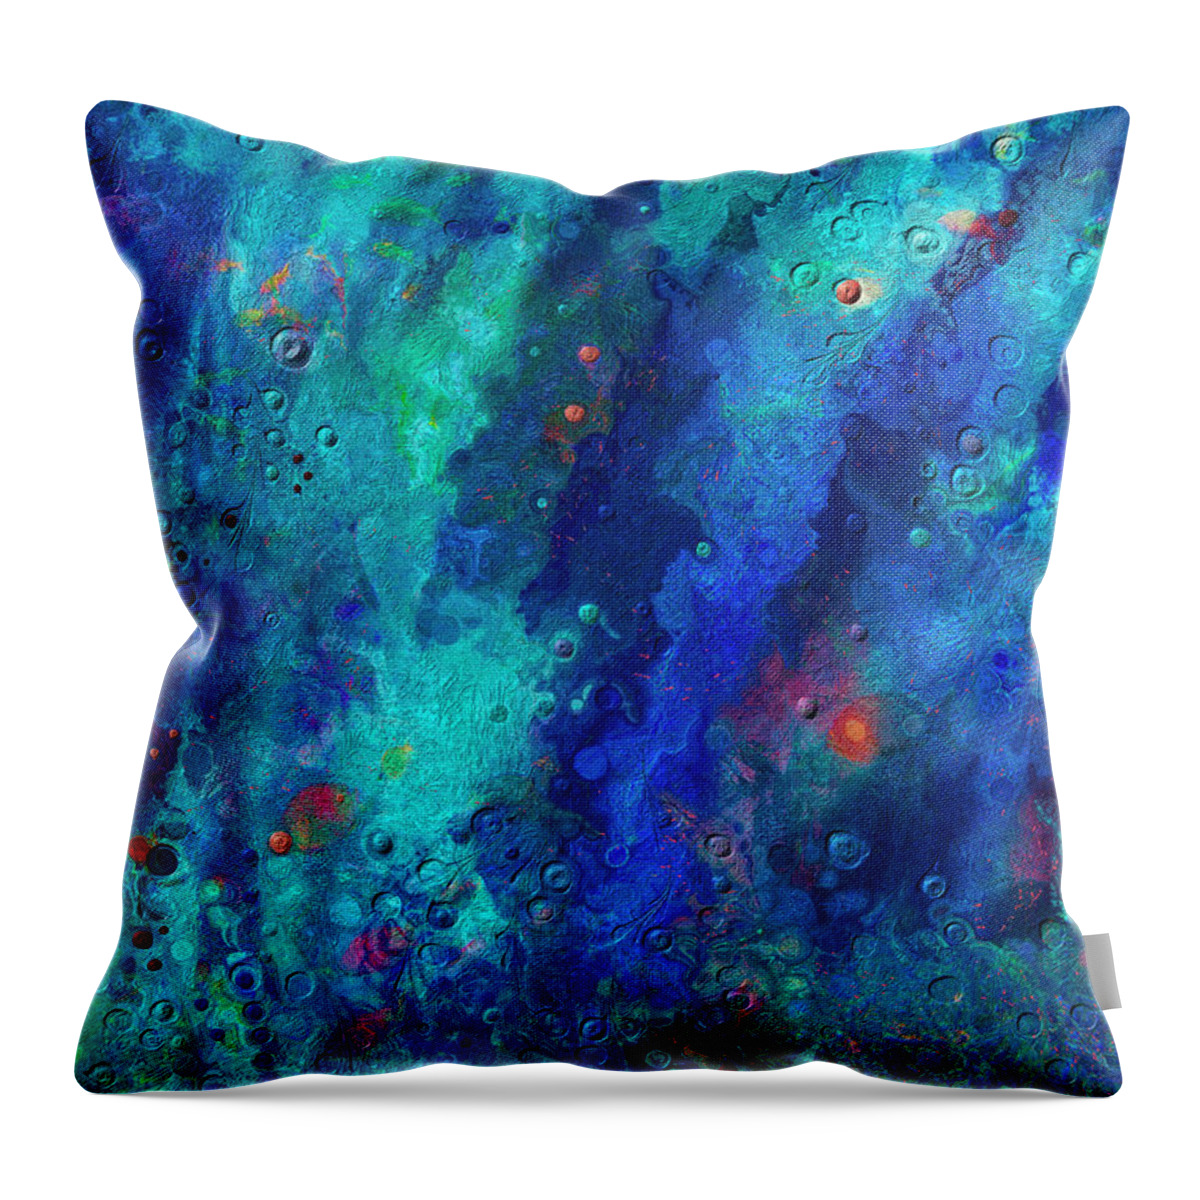 Abstract Throw Pillow featuring the digital art Depths of the Sea by Sandra Selle Rodriguez